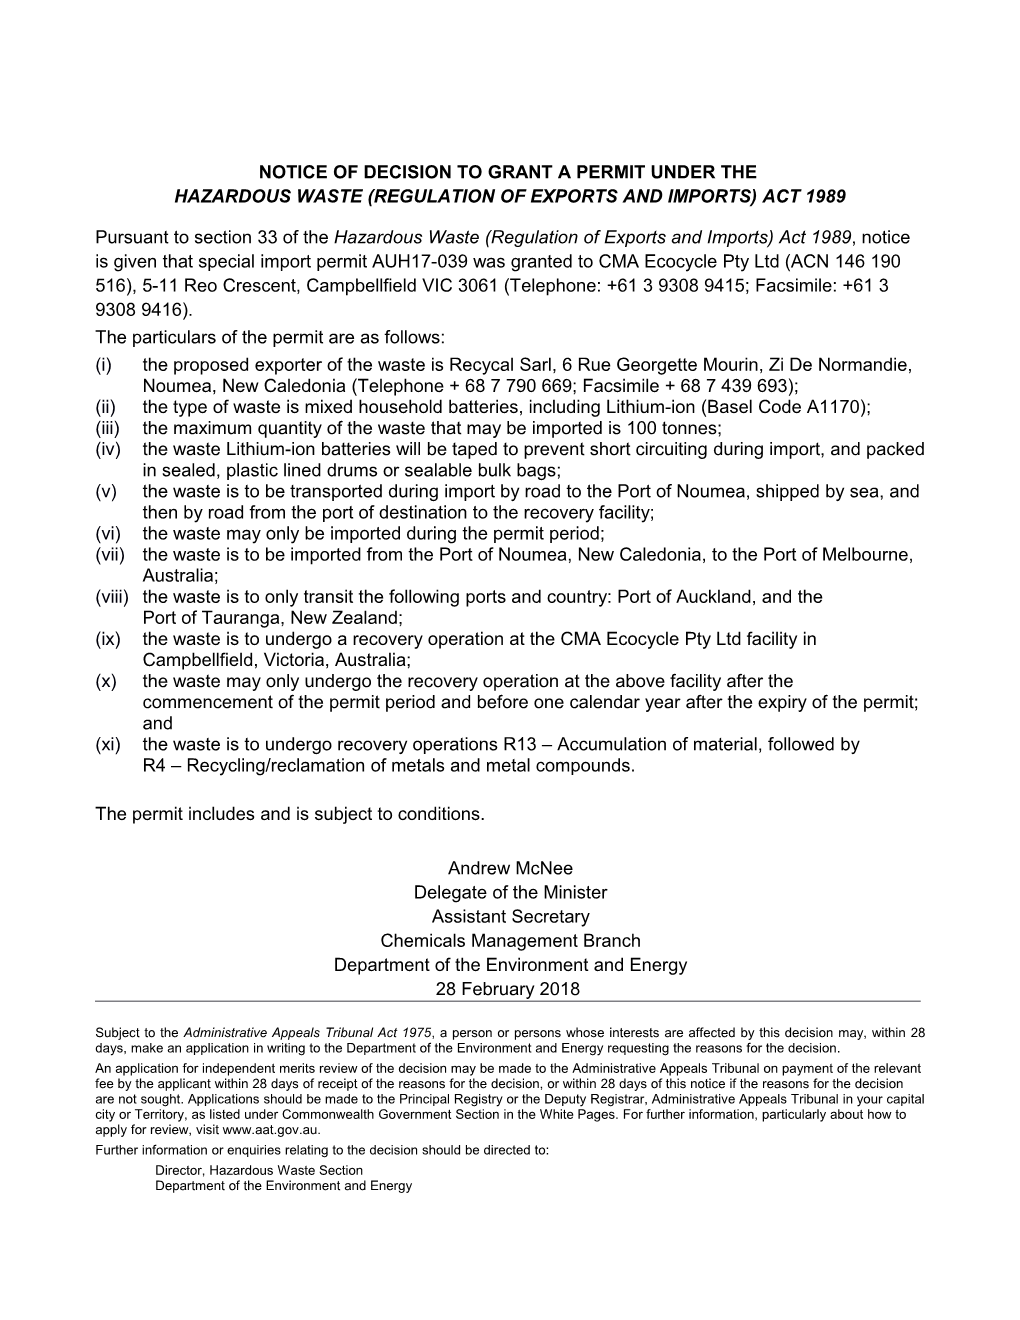 Notice of Decision to Grant a Permit to CMA Ecocycle Pty Ltd to Import Mixed House Hold